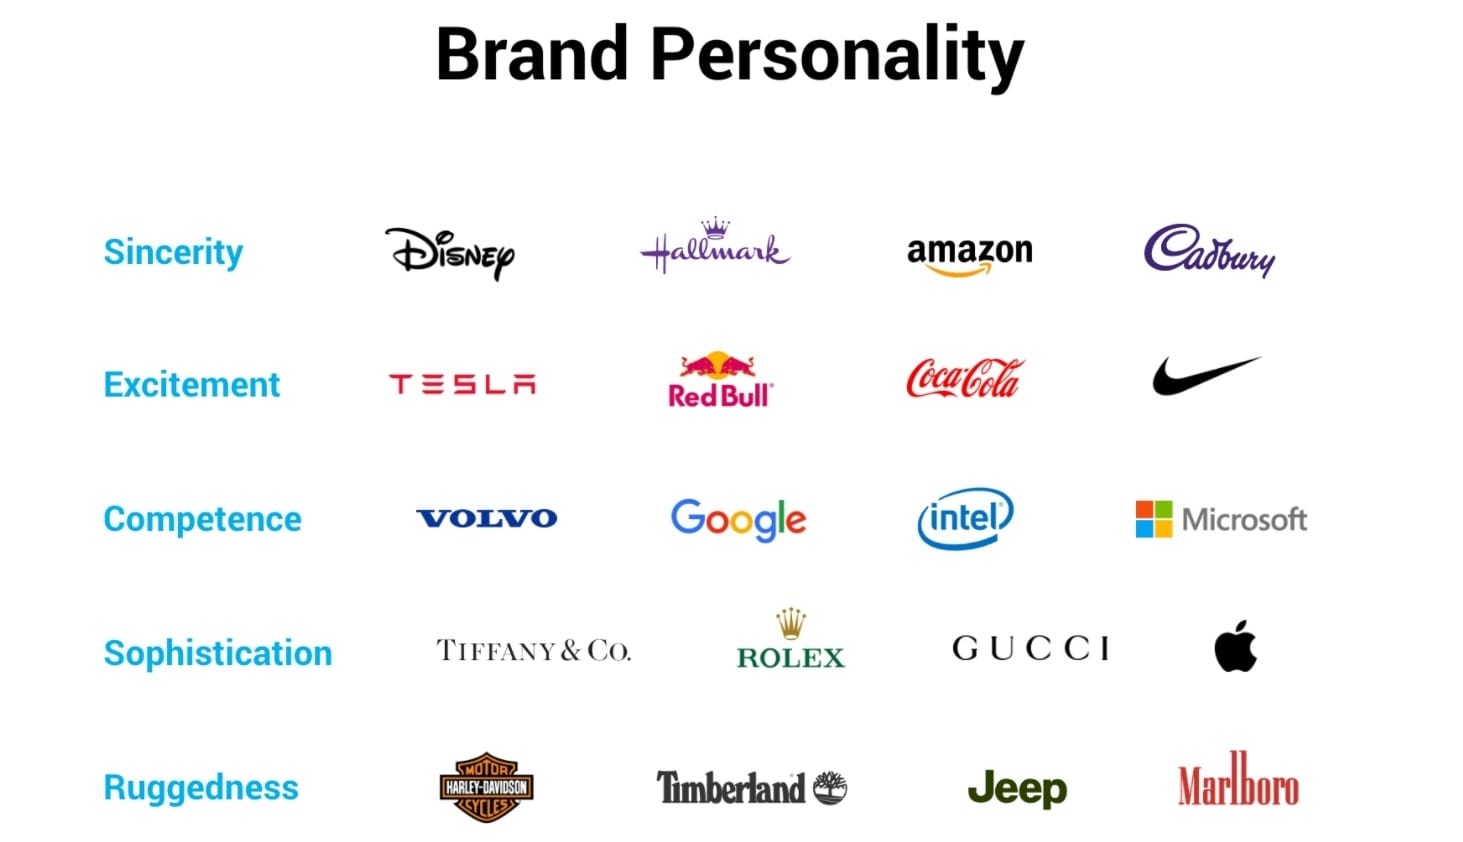 Pick your brand's mission and personality